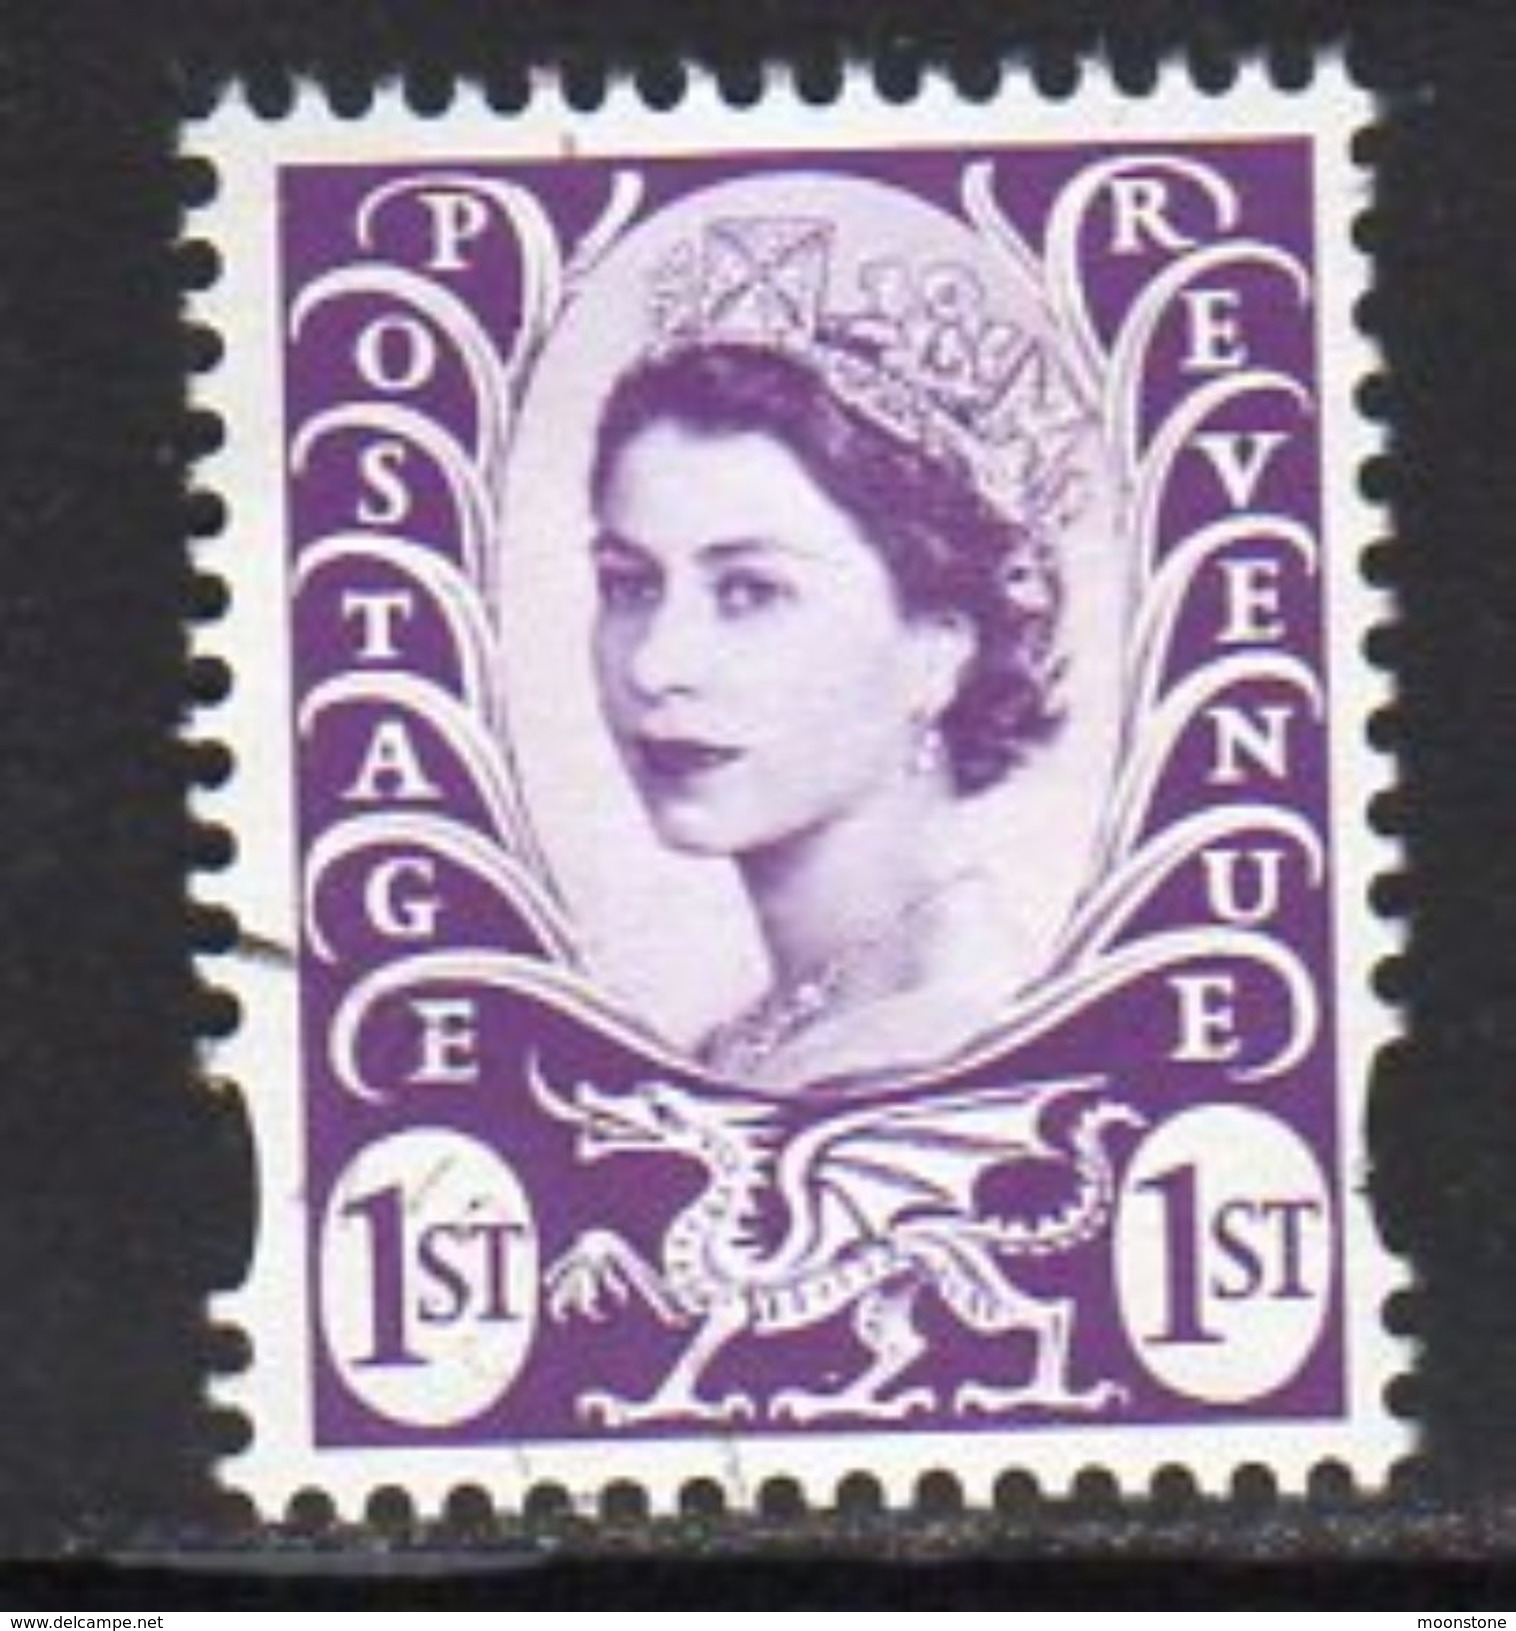 GB Wales 2008 1st Class Violet (Wilding) Ex MS NI153, Used - Wales